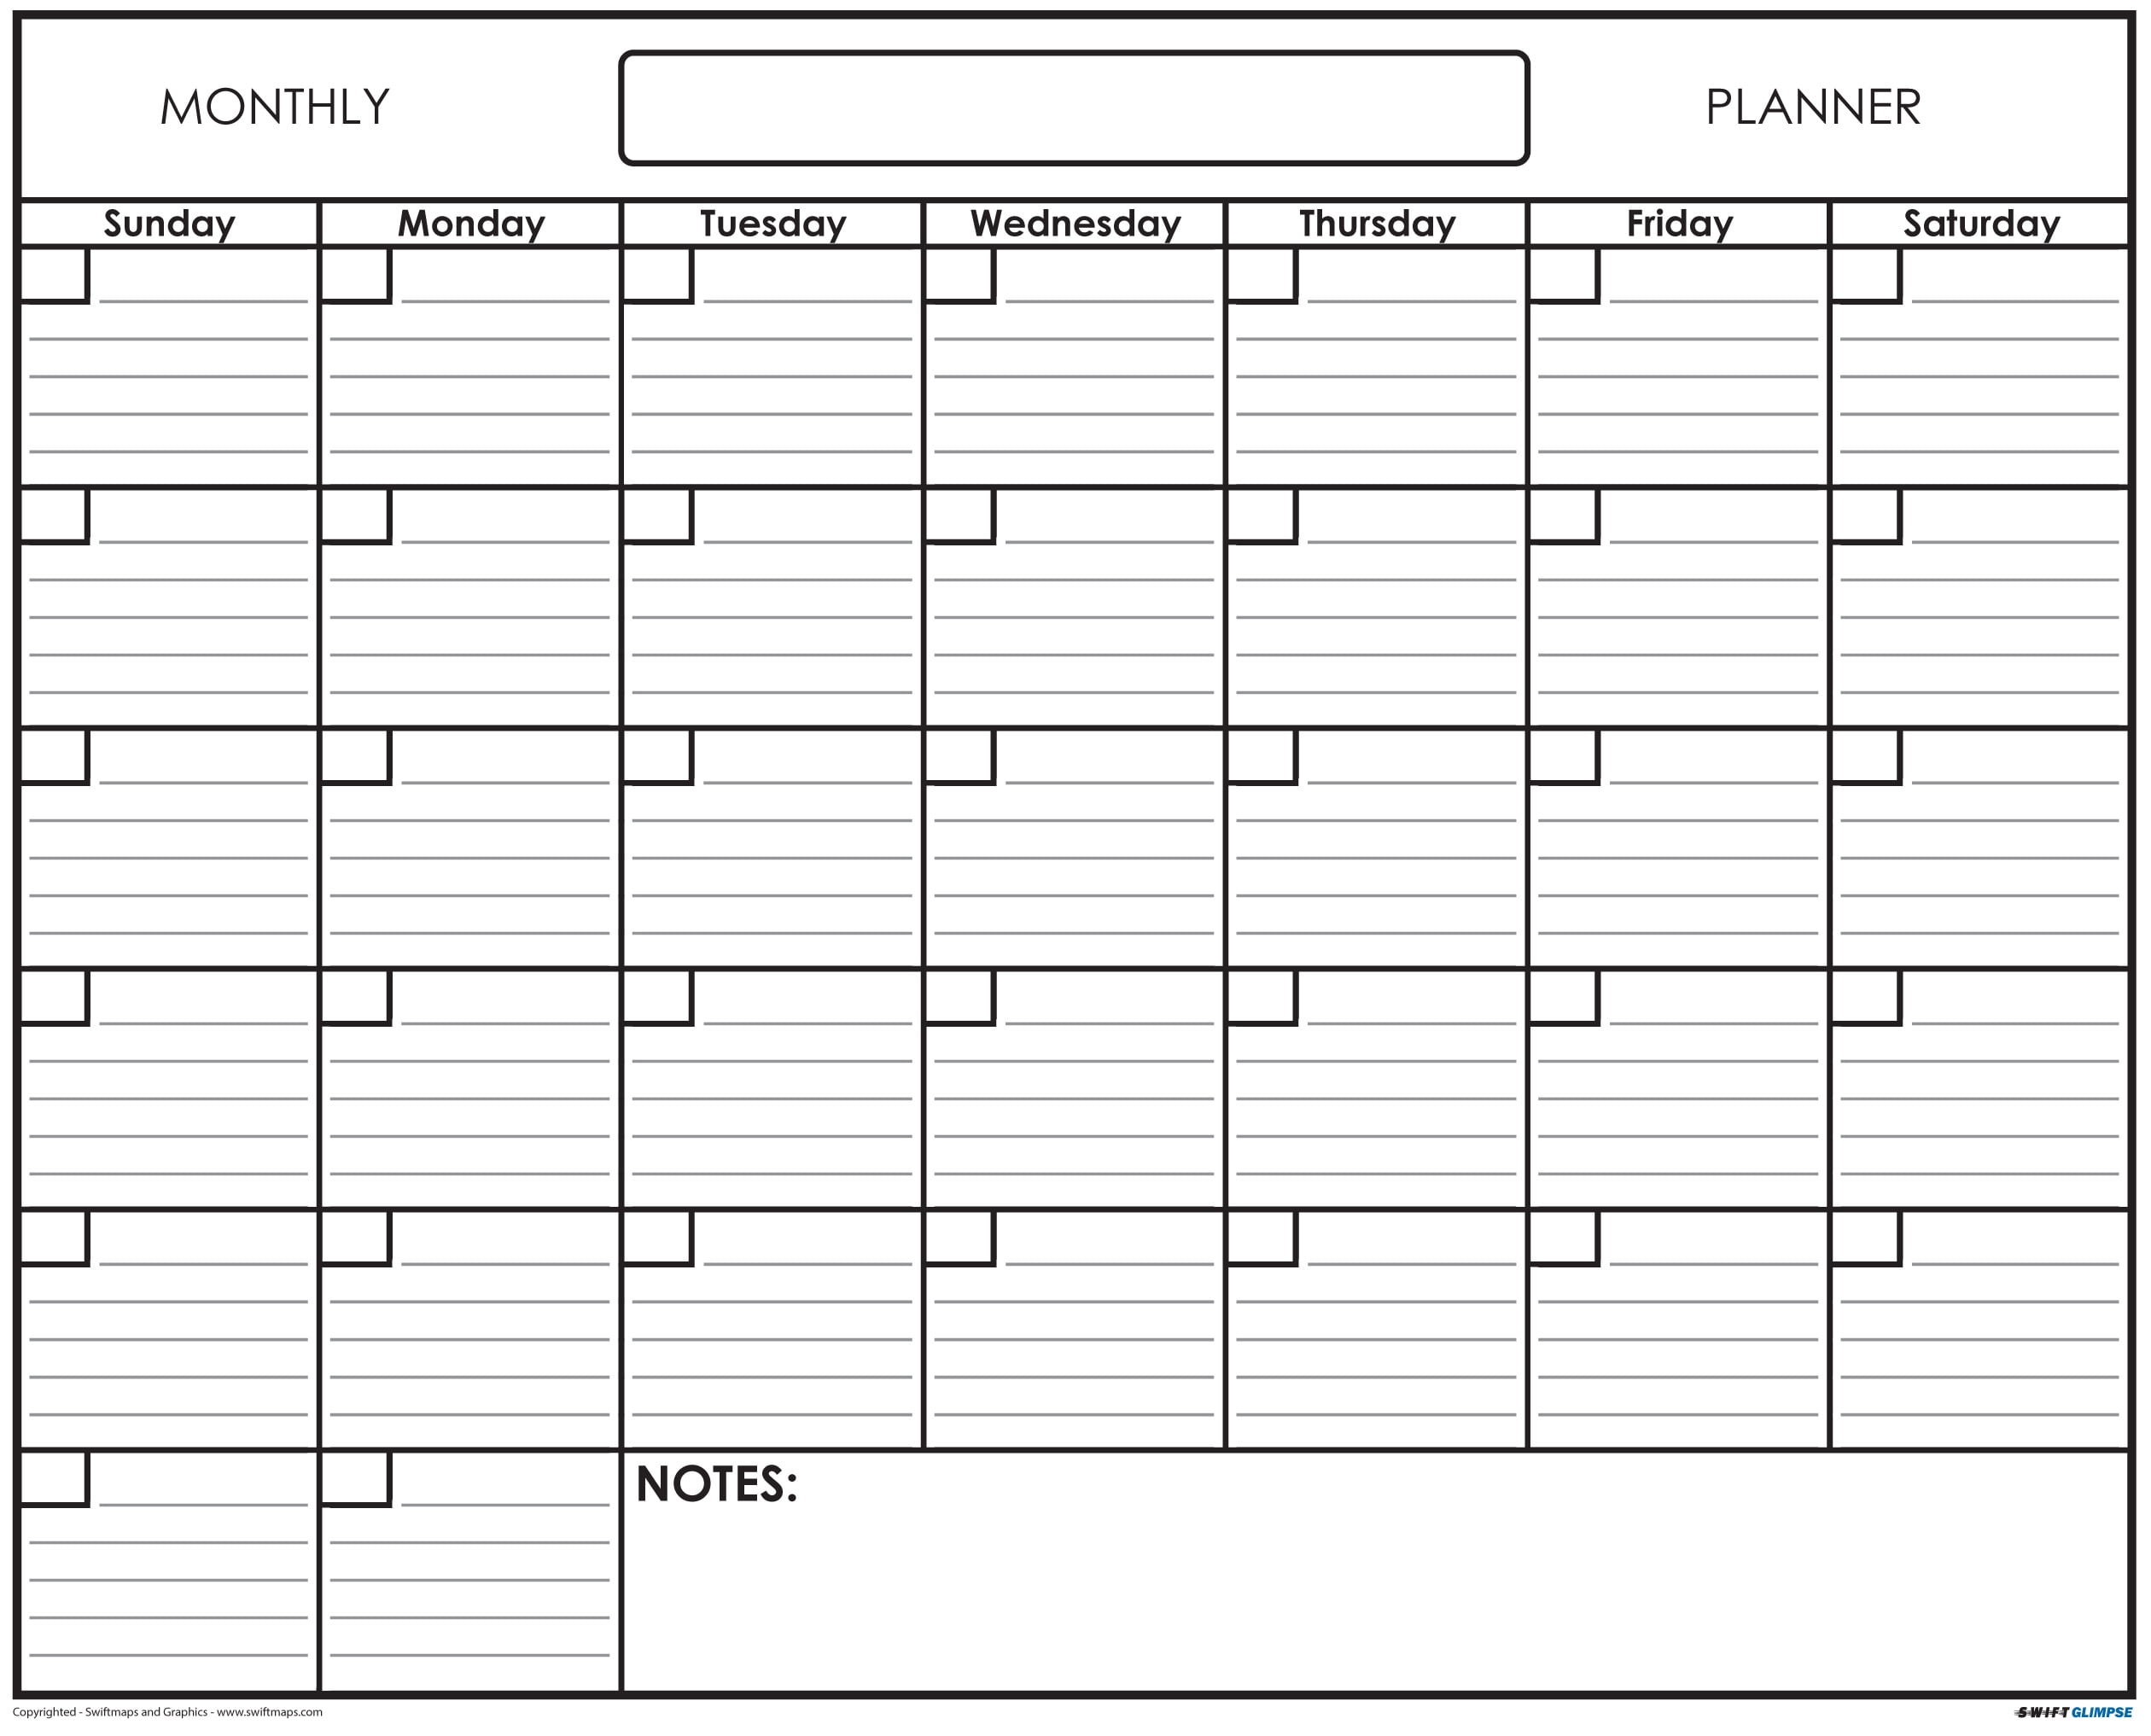 2019 Easy View Wall Calendar Month to view Planner with space to write notes etc 